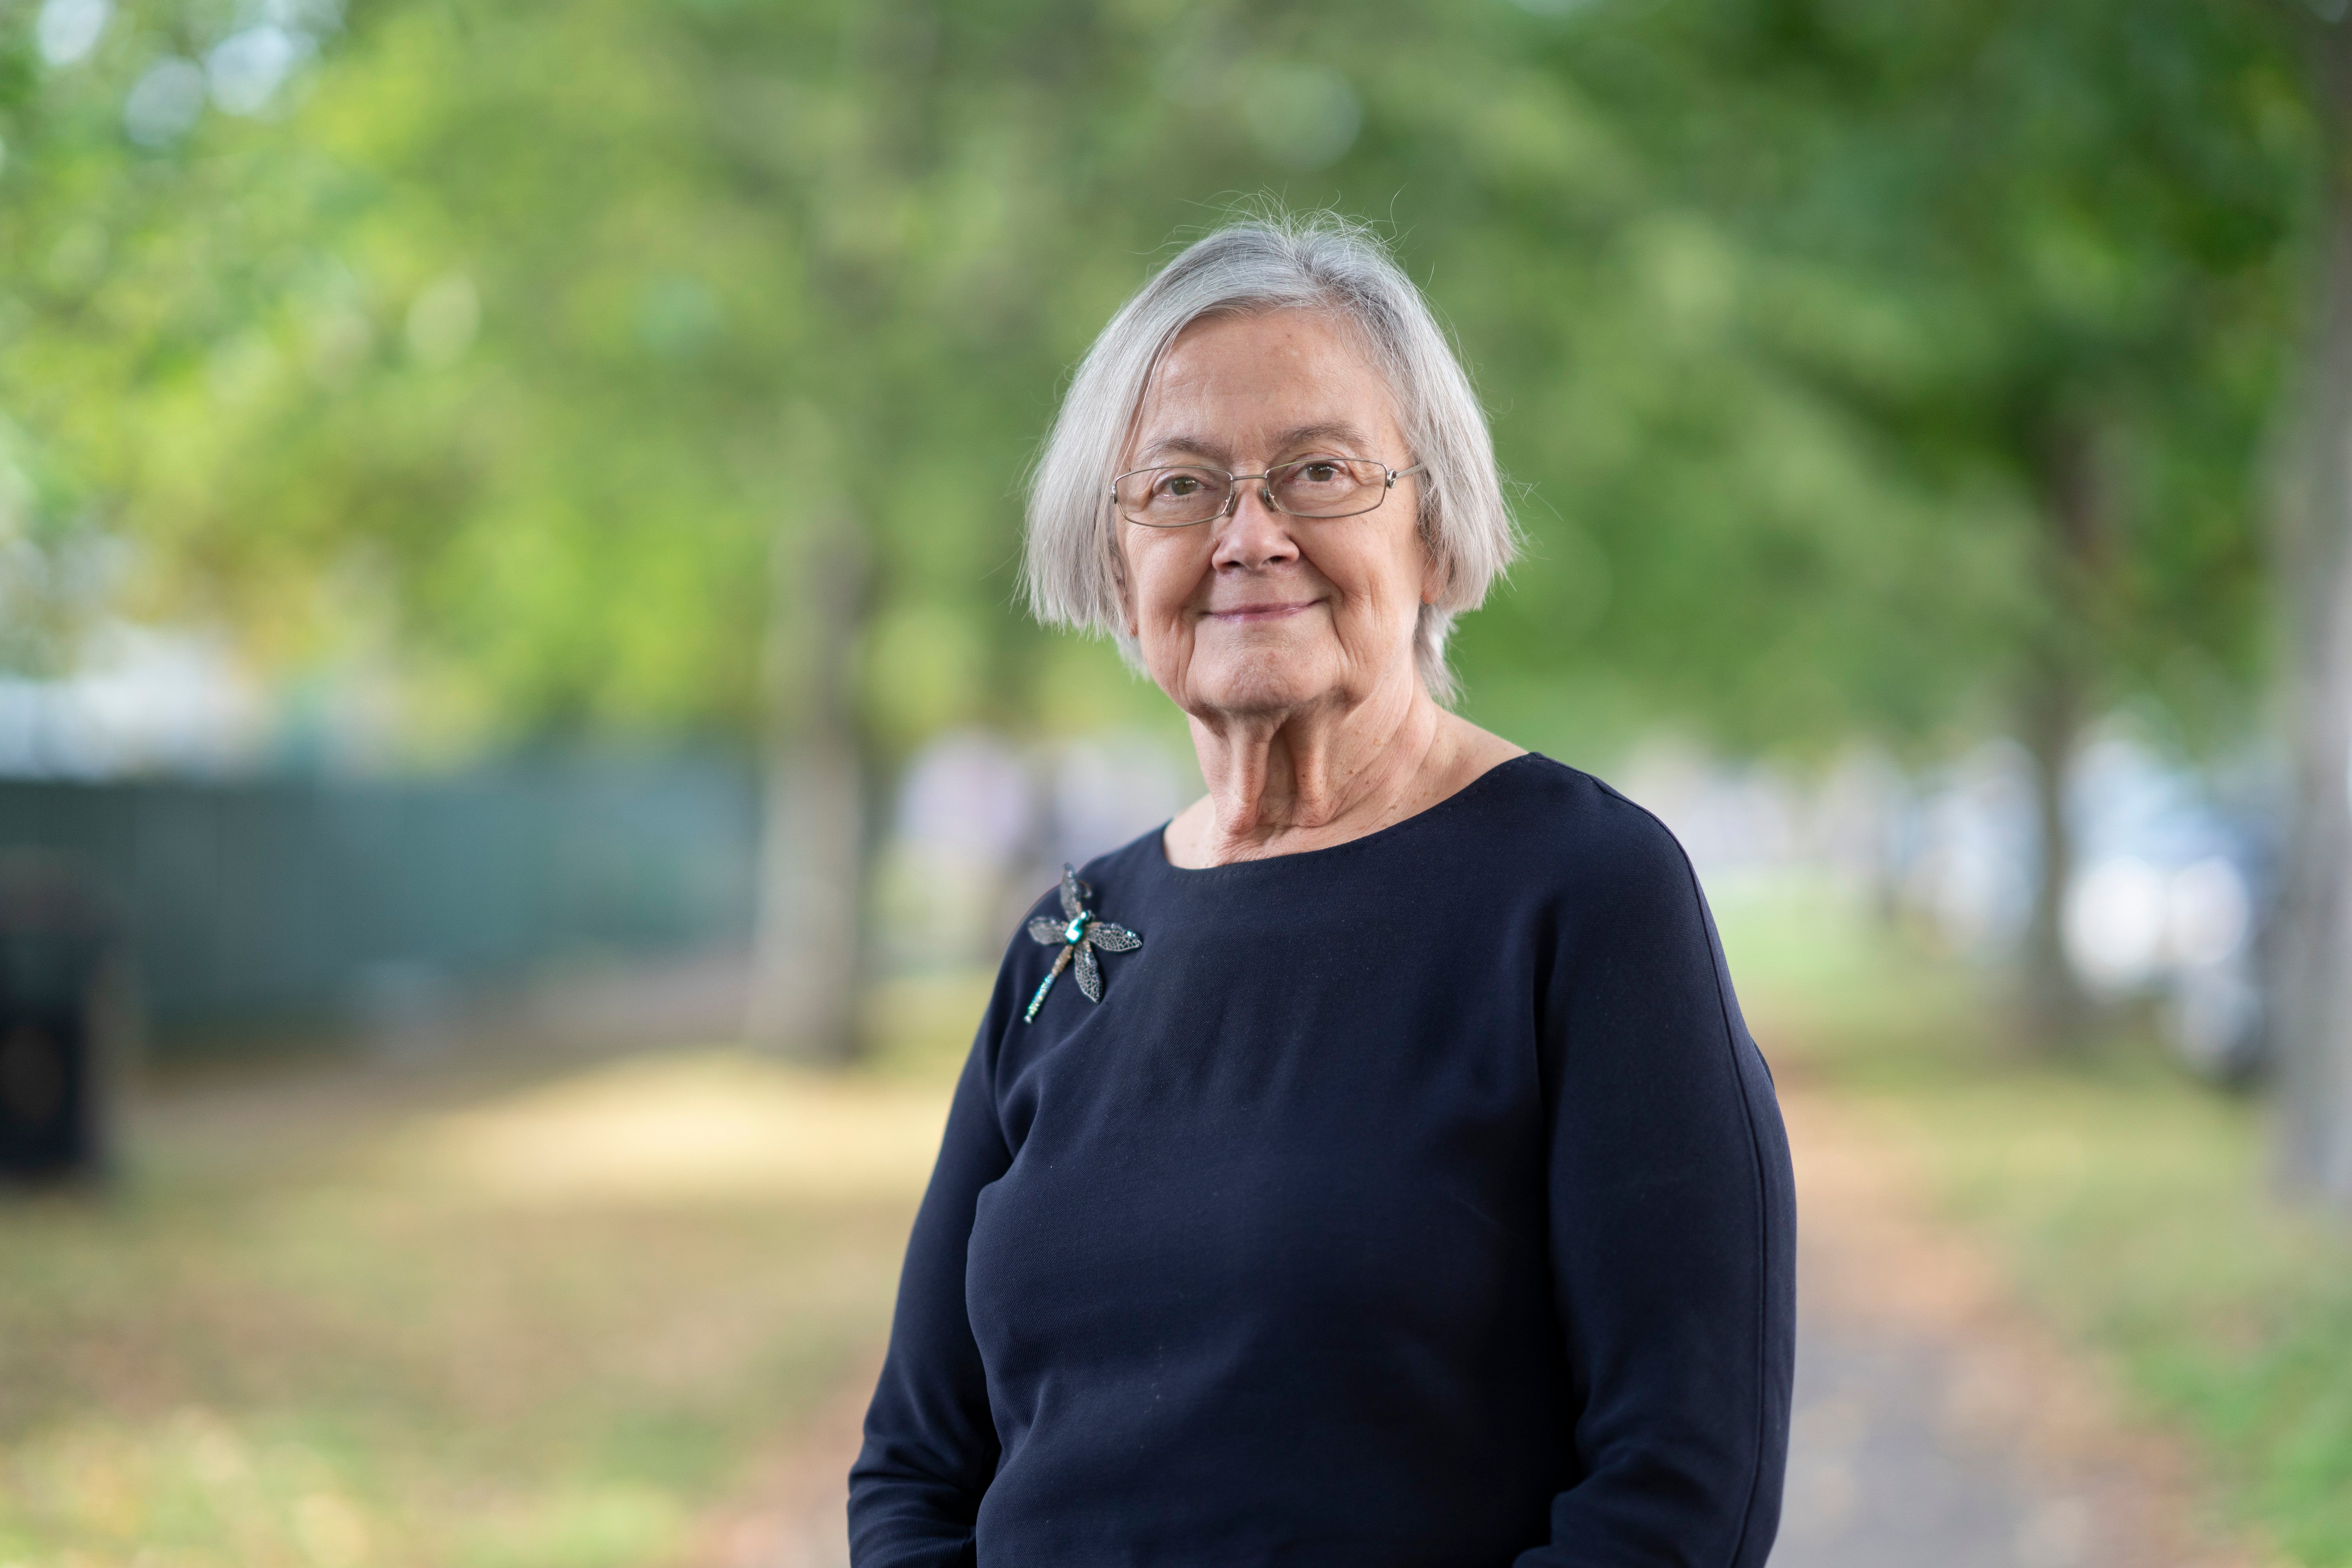 Baroness Hale of Richmond was the Supreme Court’s first female president.